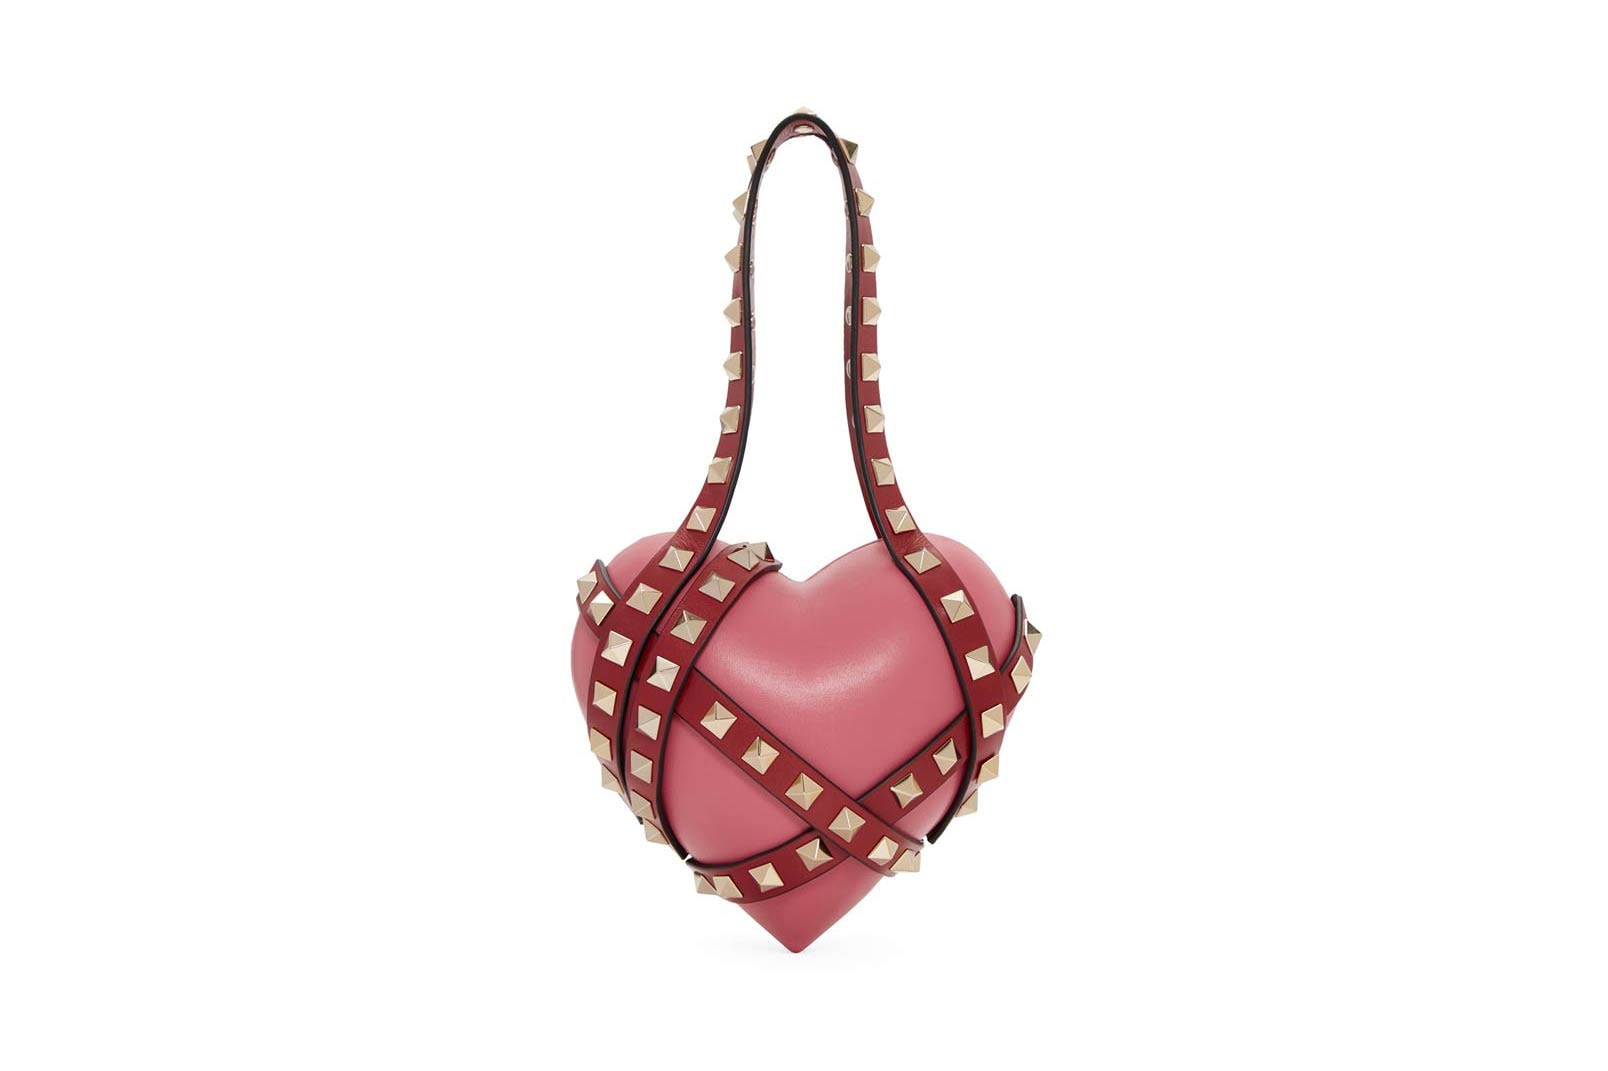 EXPRESS YOUR SPRING STYLE WITH THE VALENTINO GARAVANI ONE STUD BAG